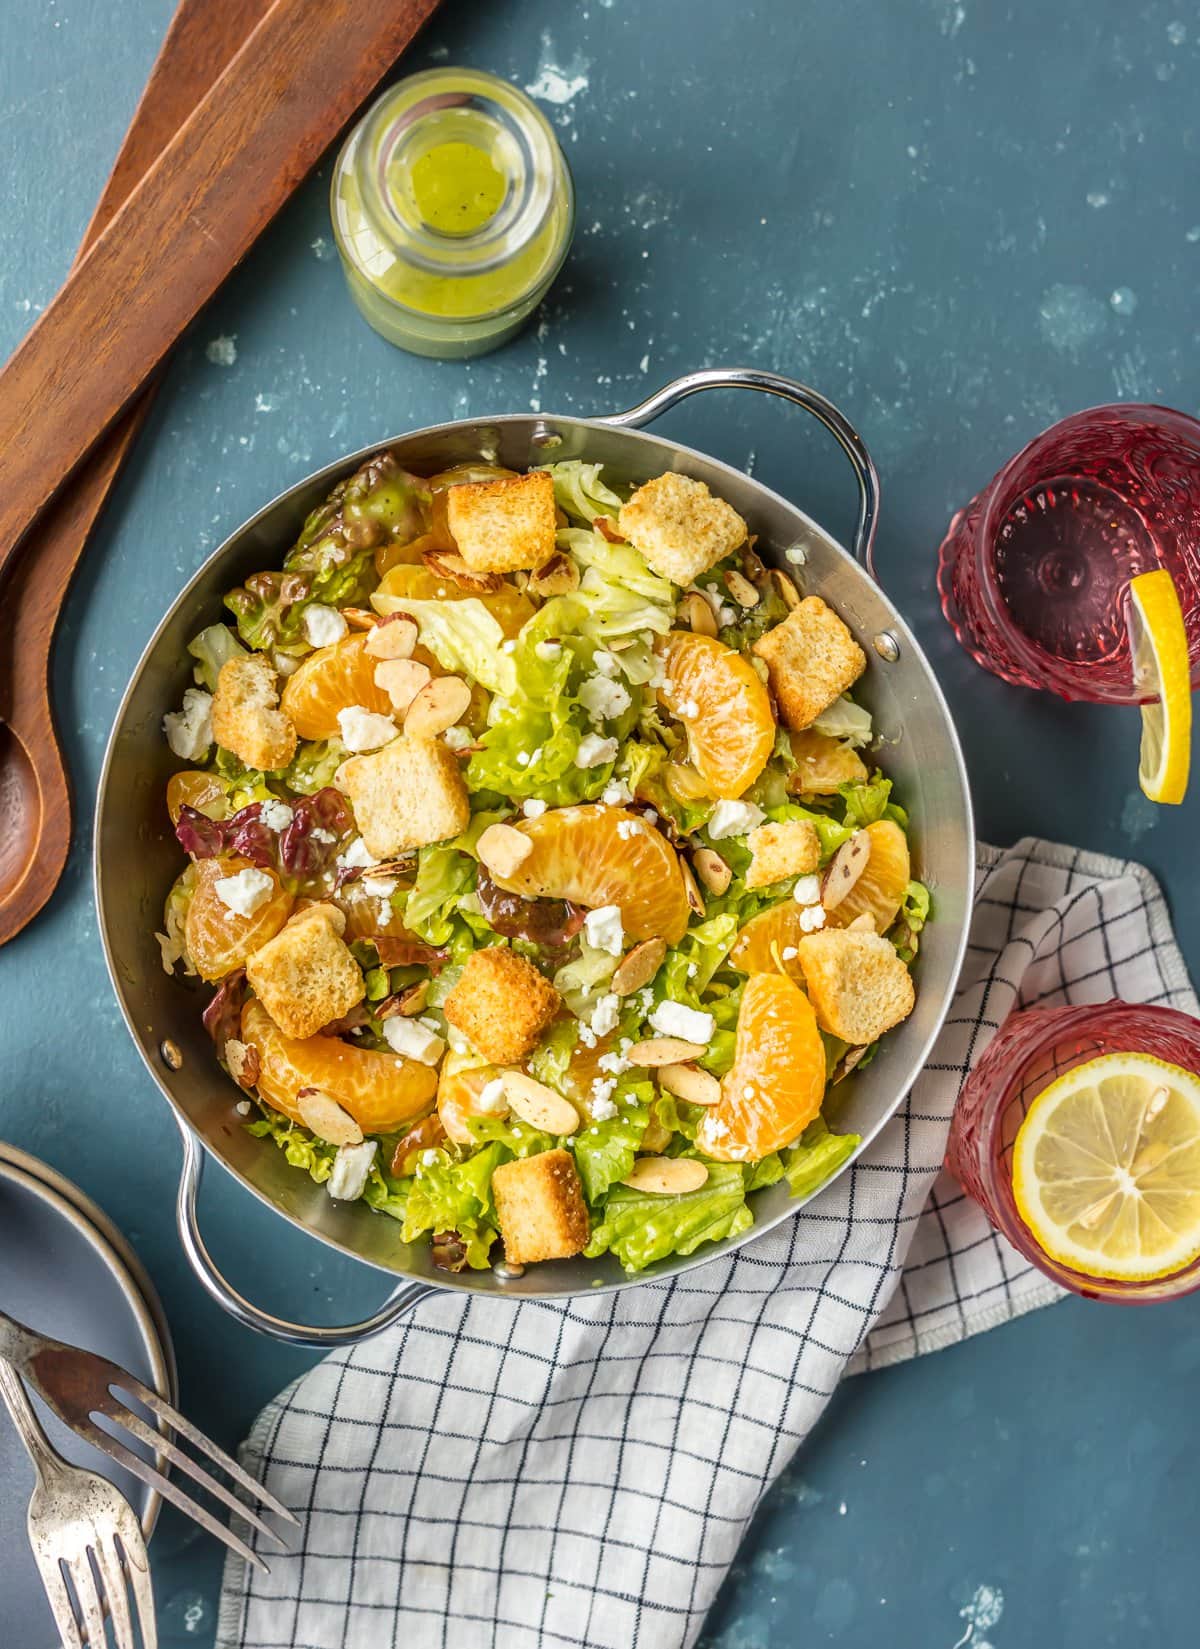 Orange Salad topped with croutons, mandarin oranges, feta, almonds, and more